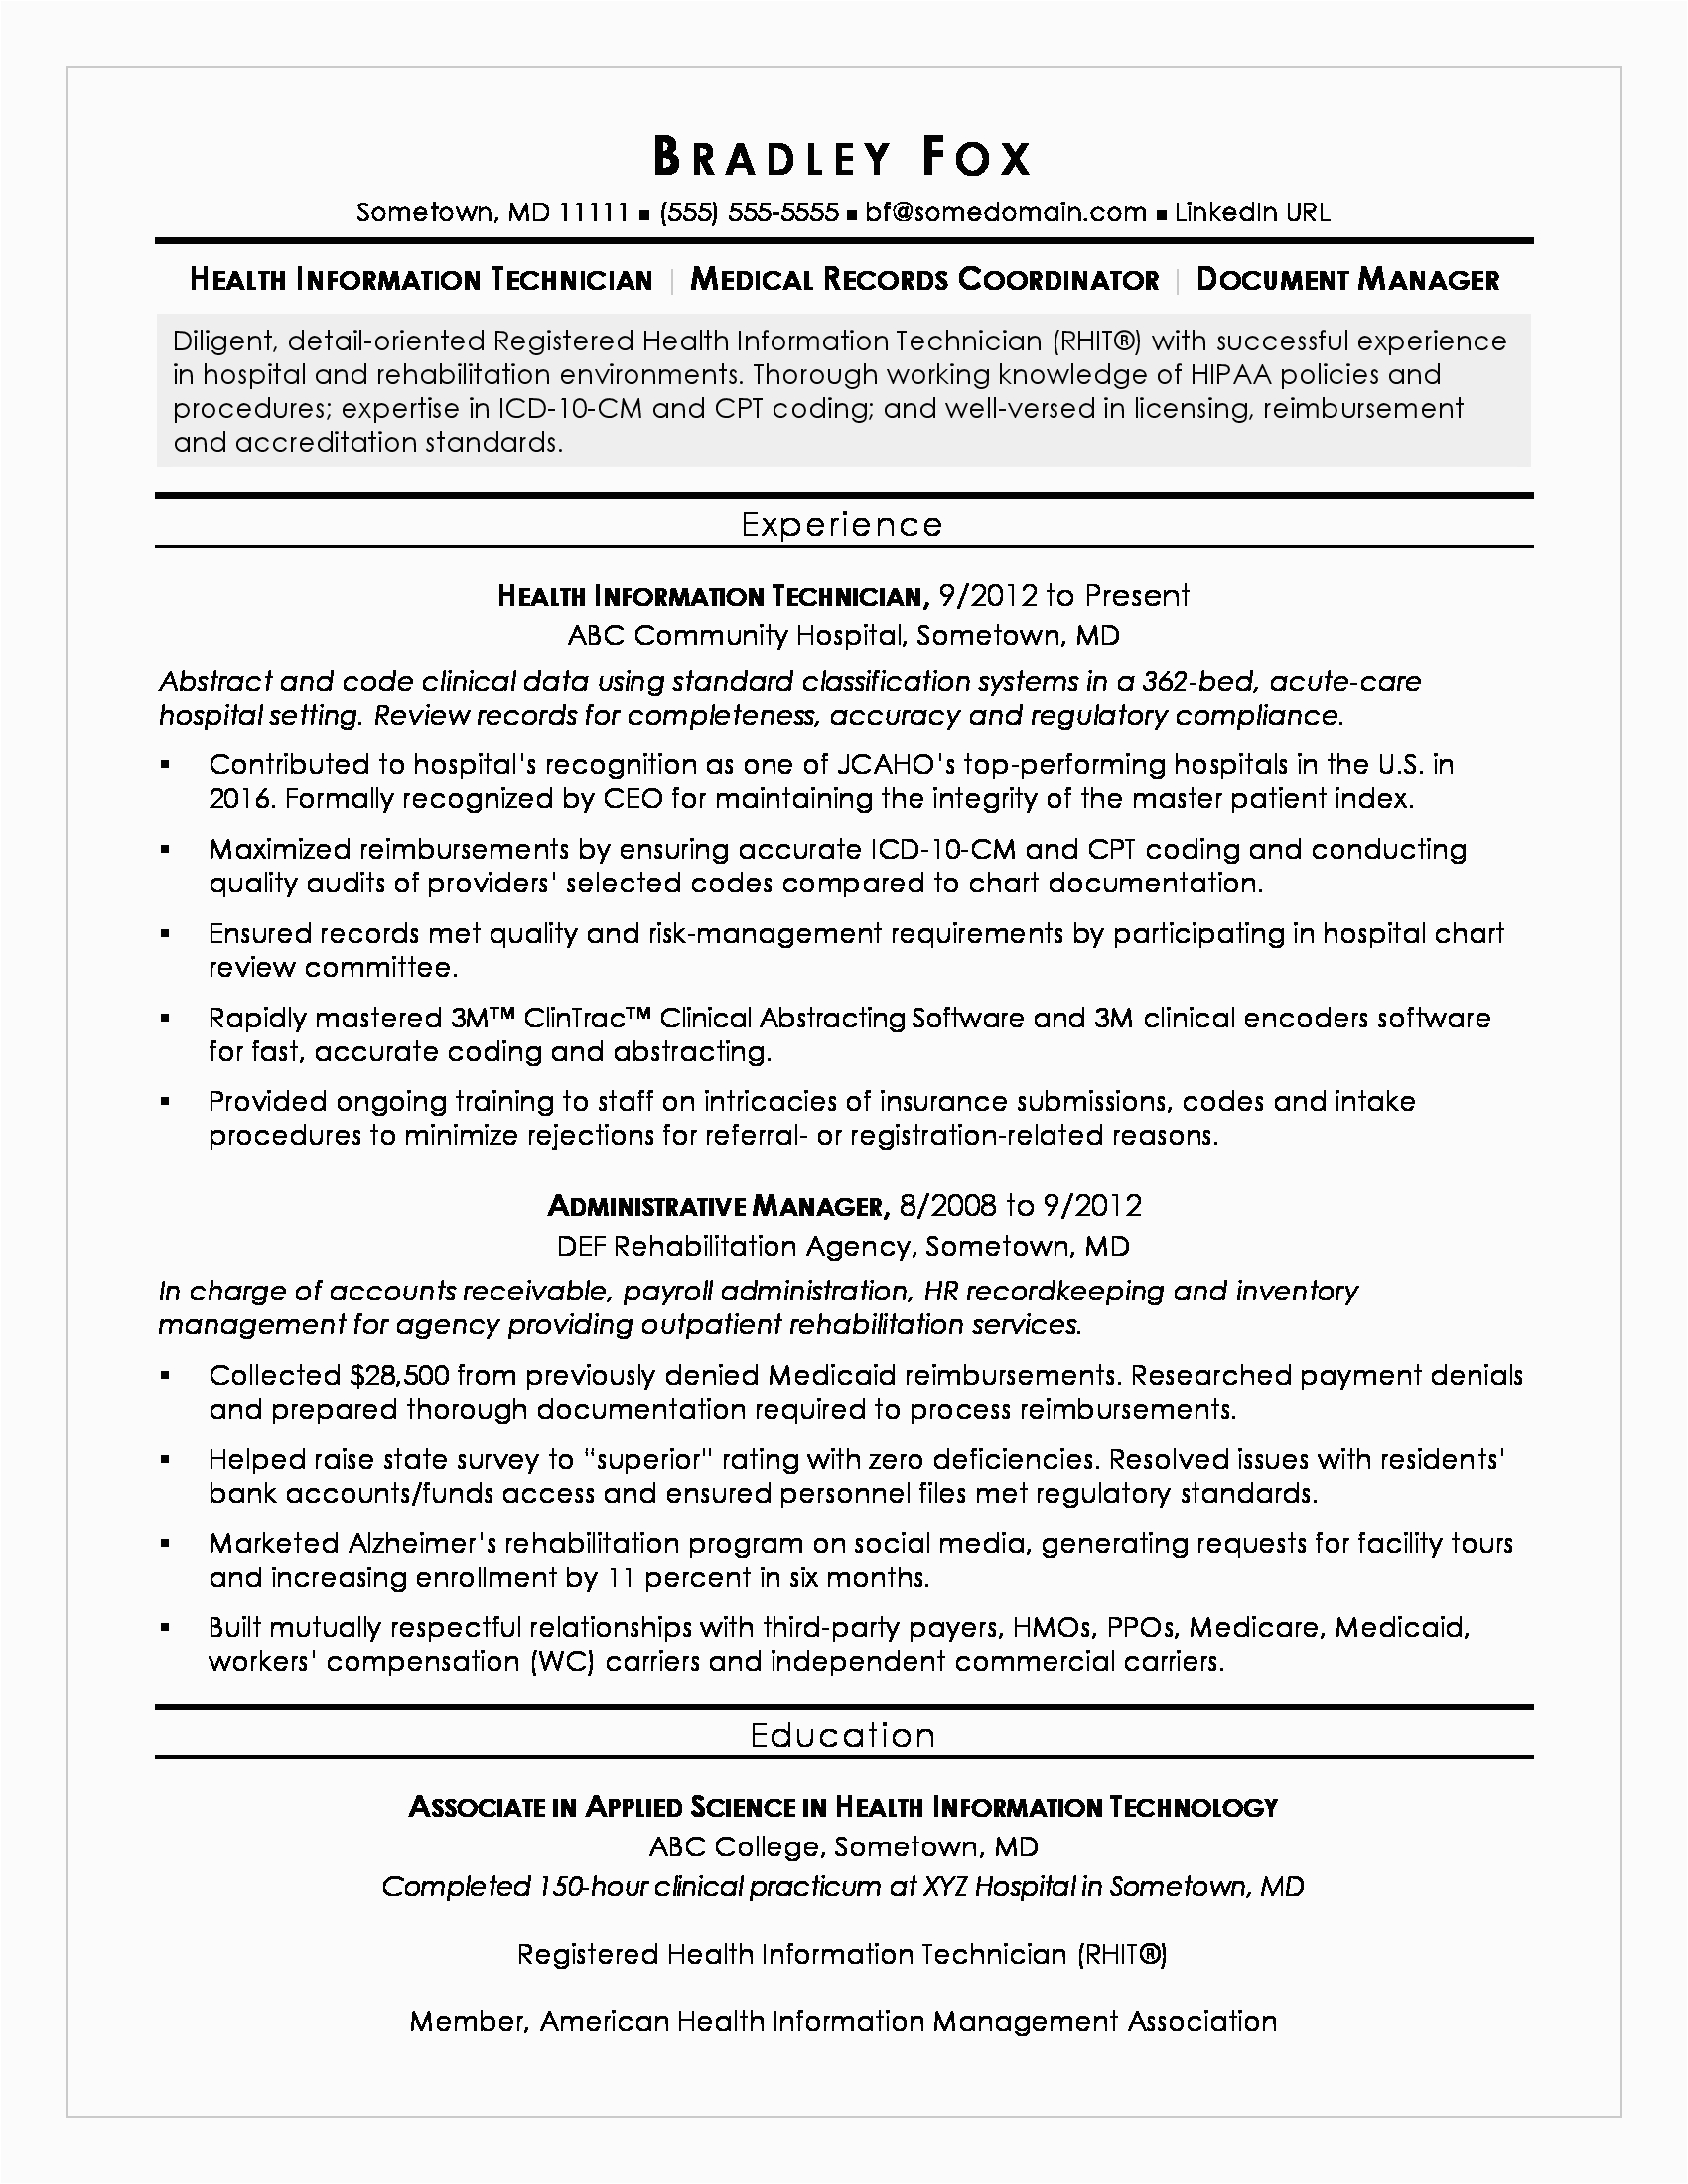 Sample Resume for Professionals In Healthcare Health Information Technician Sample Resume